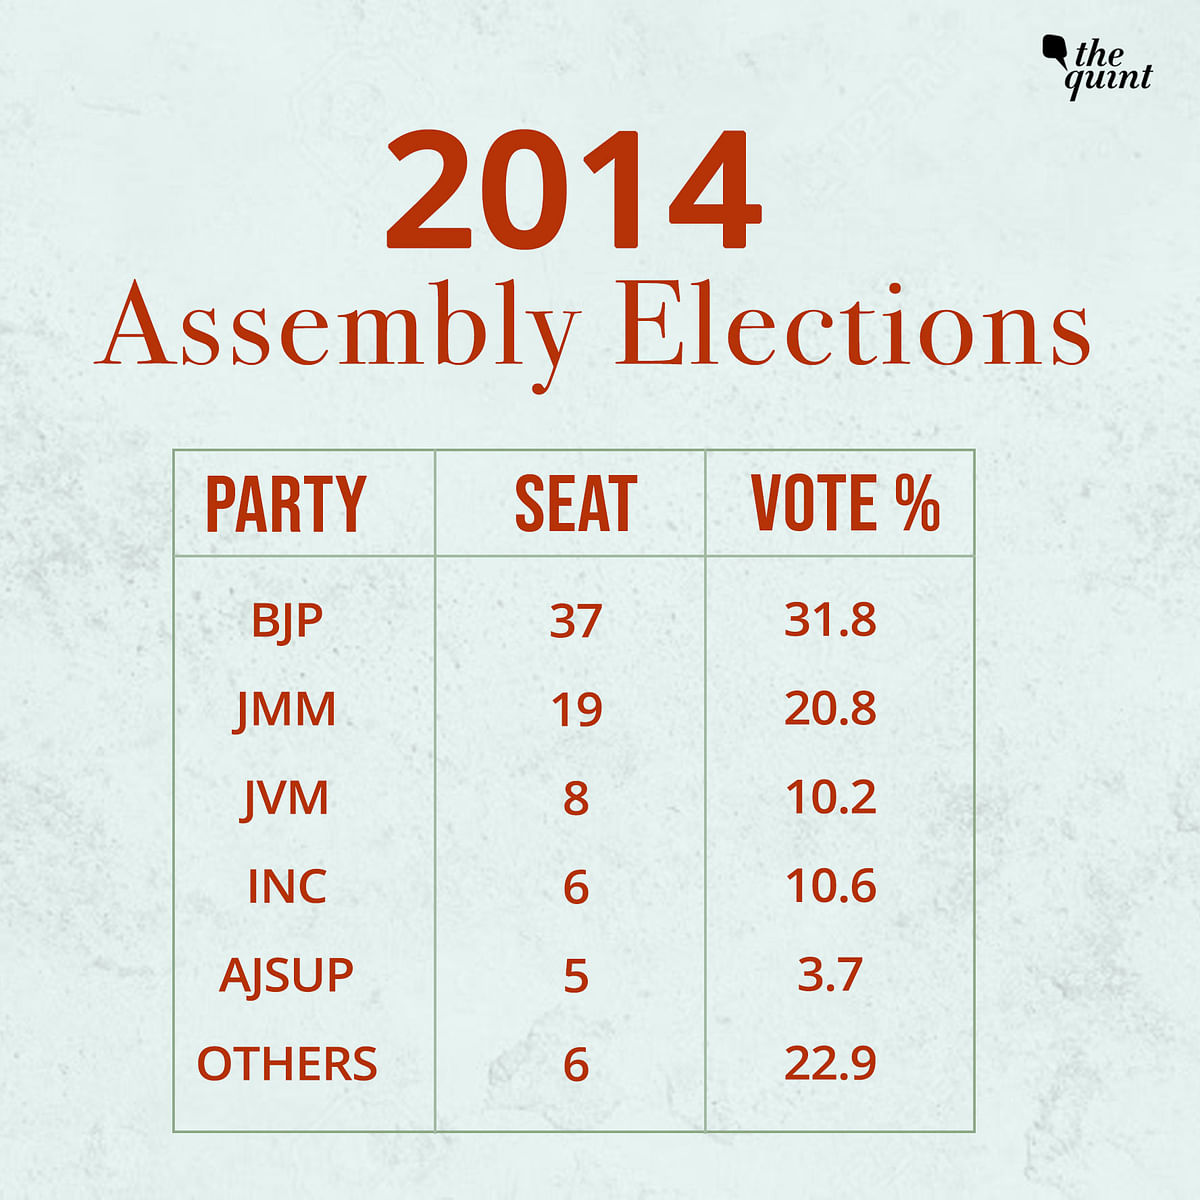 Bread & butter issues, like unemployment and farm distress, could define the Jharkhand assembly elections.